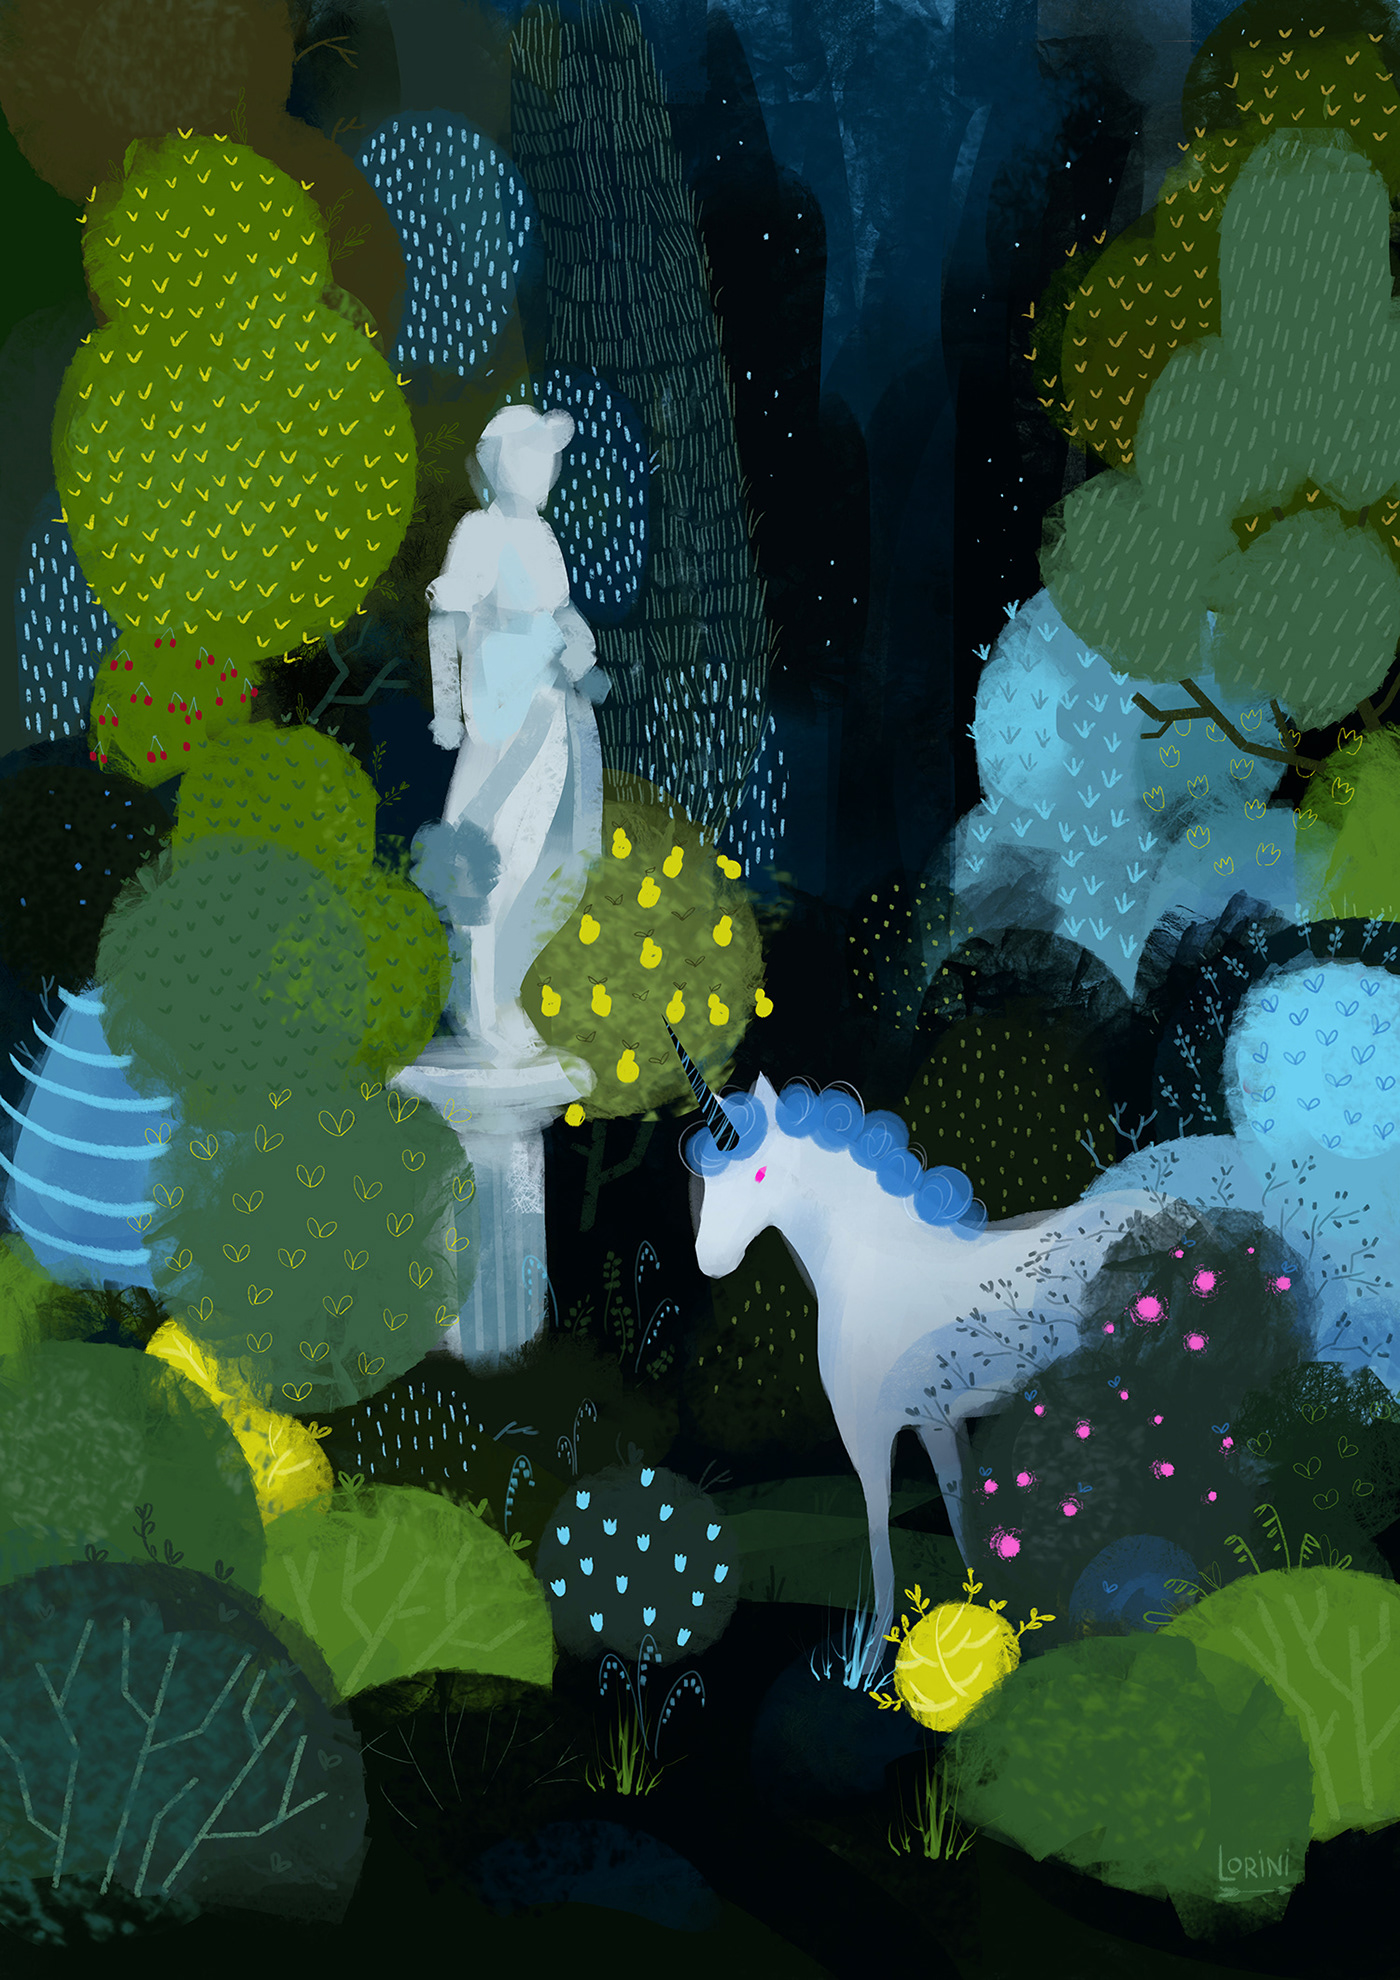 The green bushes are hiding white unicorn with blue mane and pink eyes. Behind him stands a statue